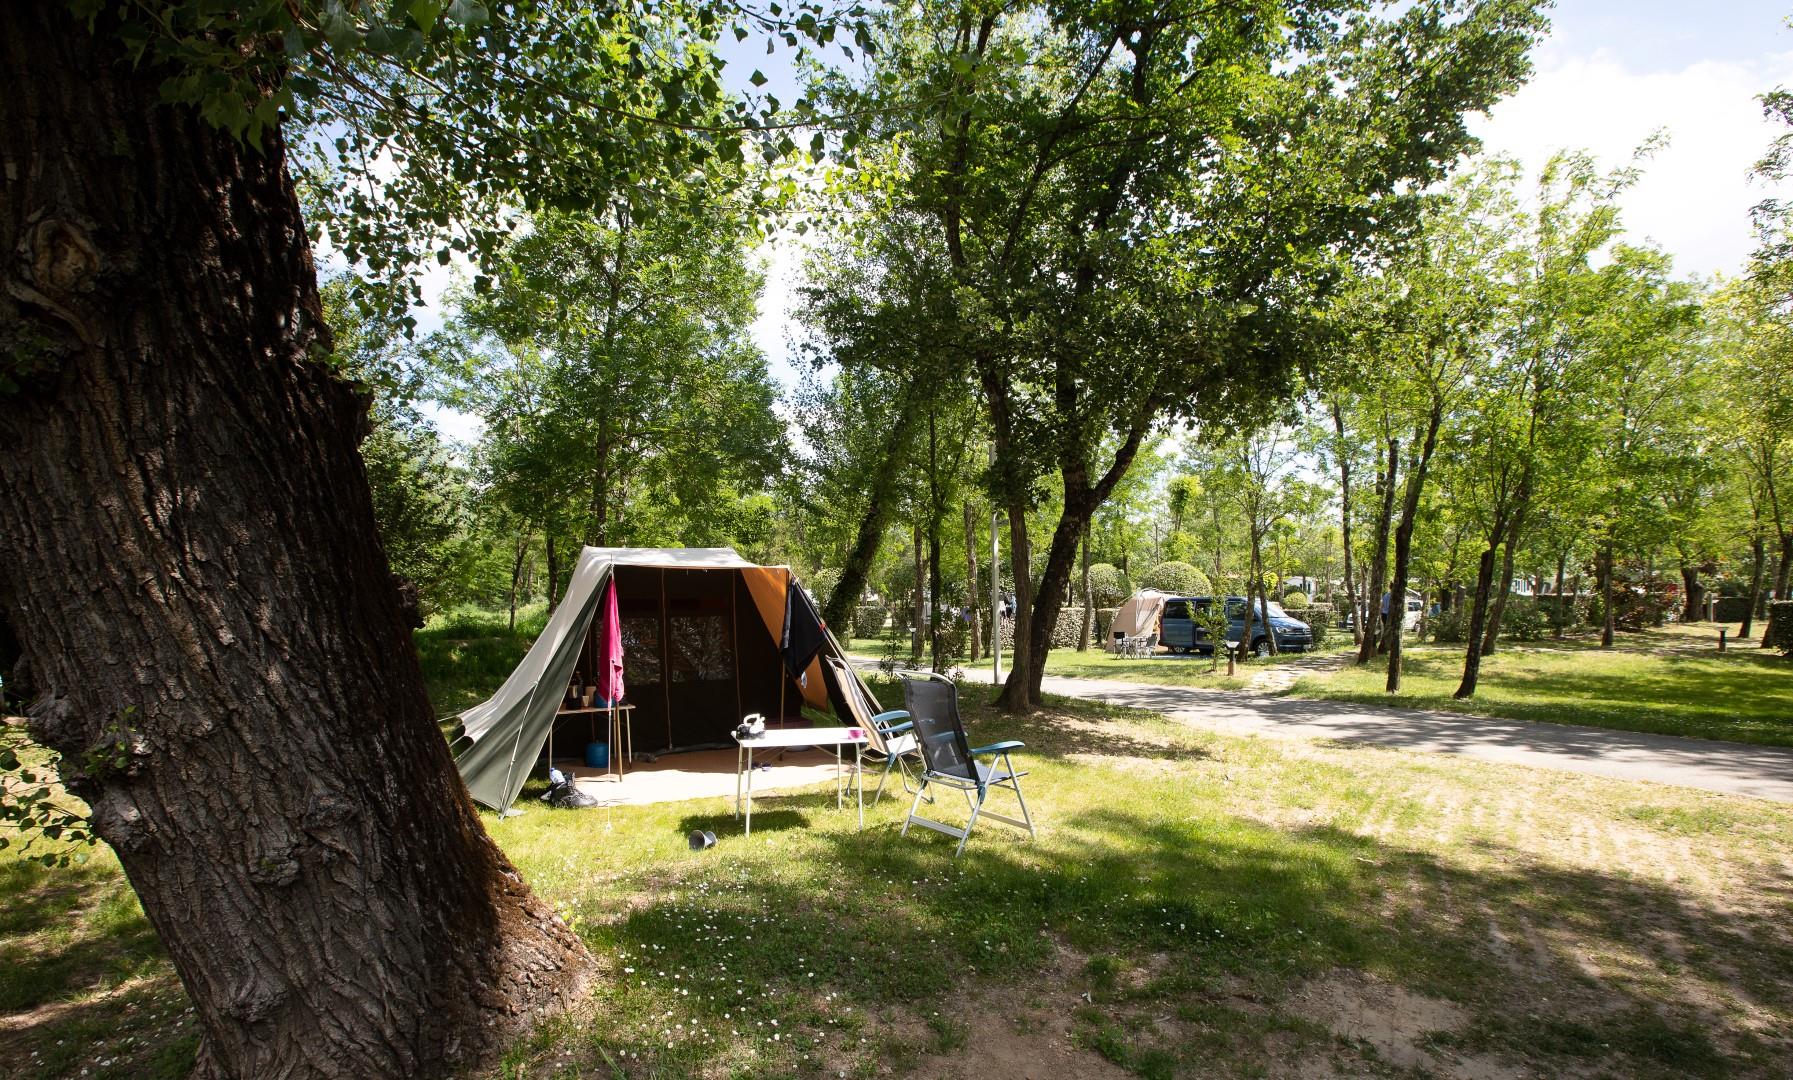 Pitch - Camping Pitch, Electricity 10 Ampères Included - CAMPING LA ROUBINE